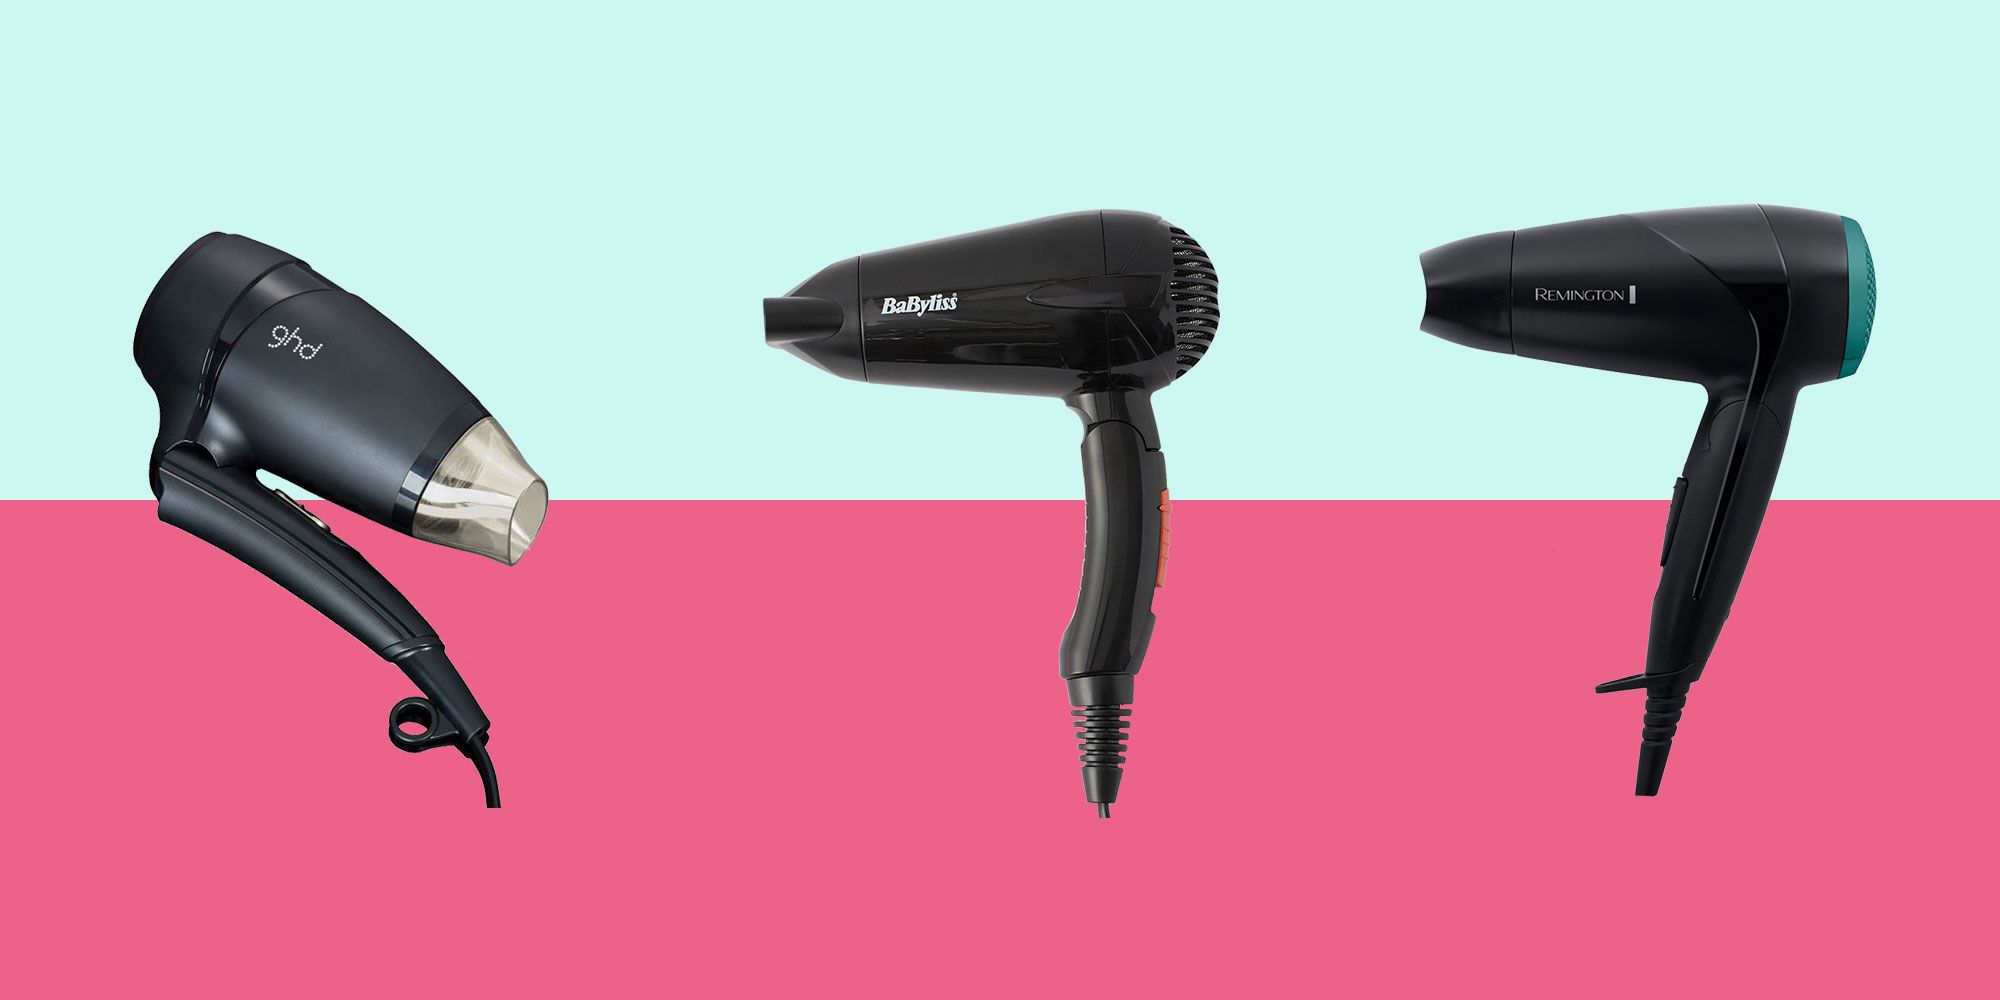 15 Amazing Portable Hair Dryer For Travel For 2023